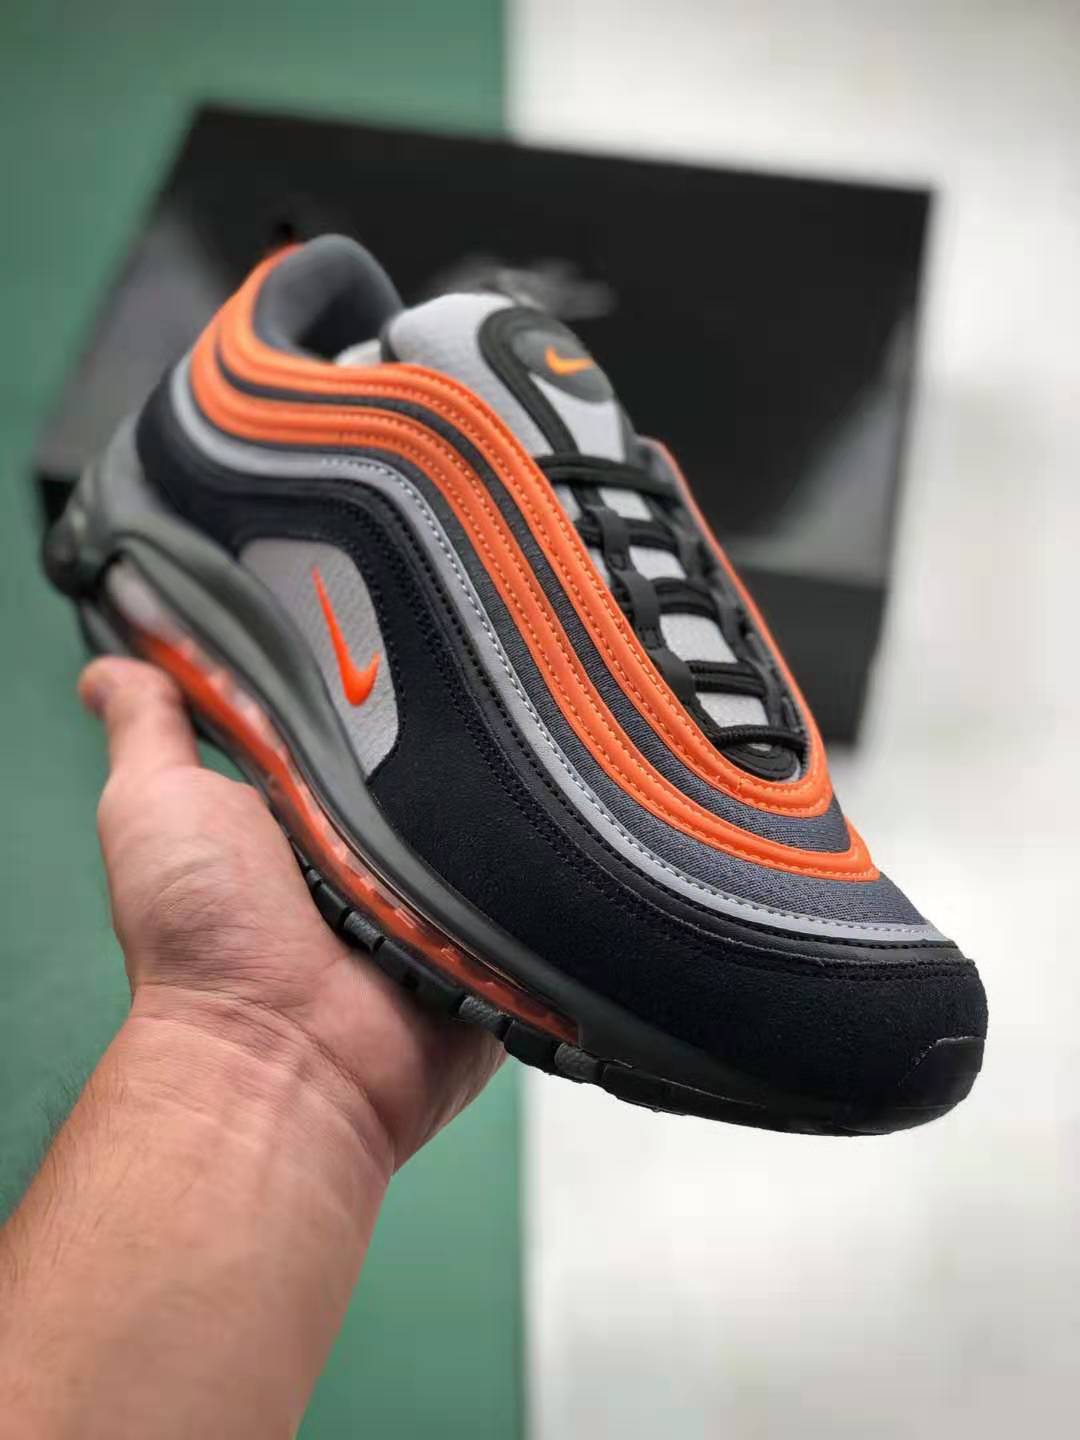 Nike Air Max 97 Wolf Grey Total Orange Black 921522-013 - Stylish and Versatile Footwear for the Modern Individual